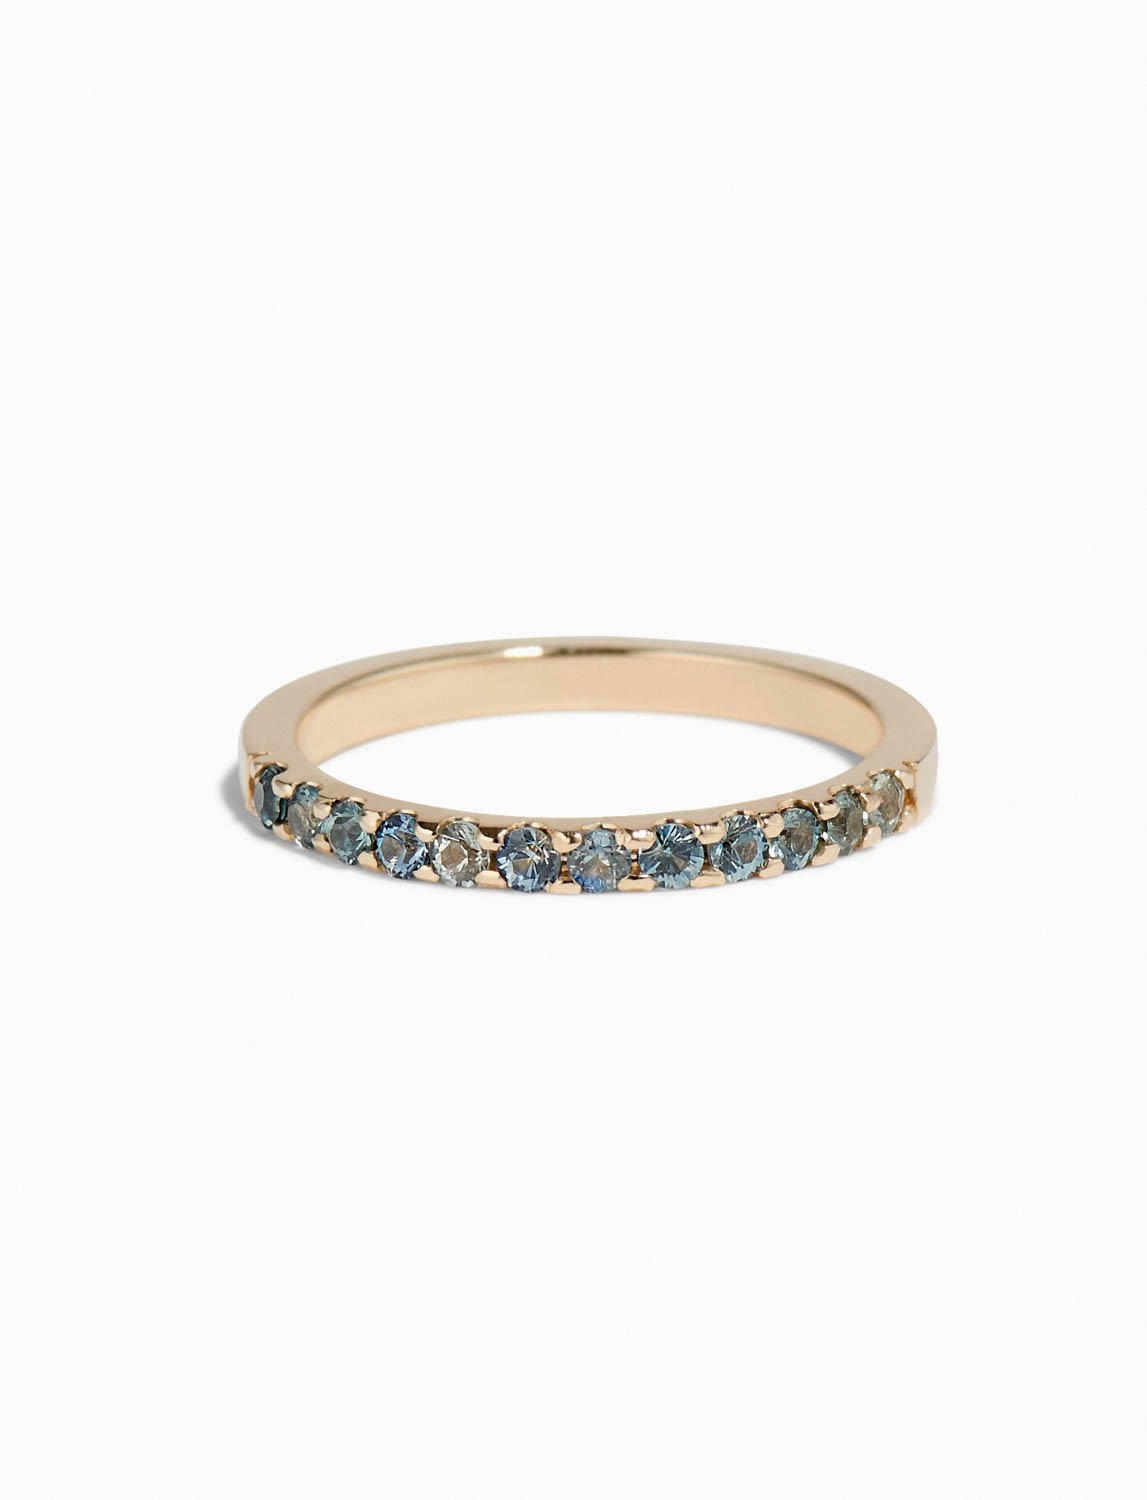 WIDE_HALF_BAND_WITH_BLUE_GREEN_SAPPHIRES_14KY_053-2_WEB.jpg